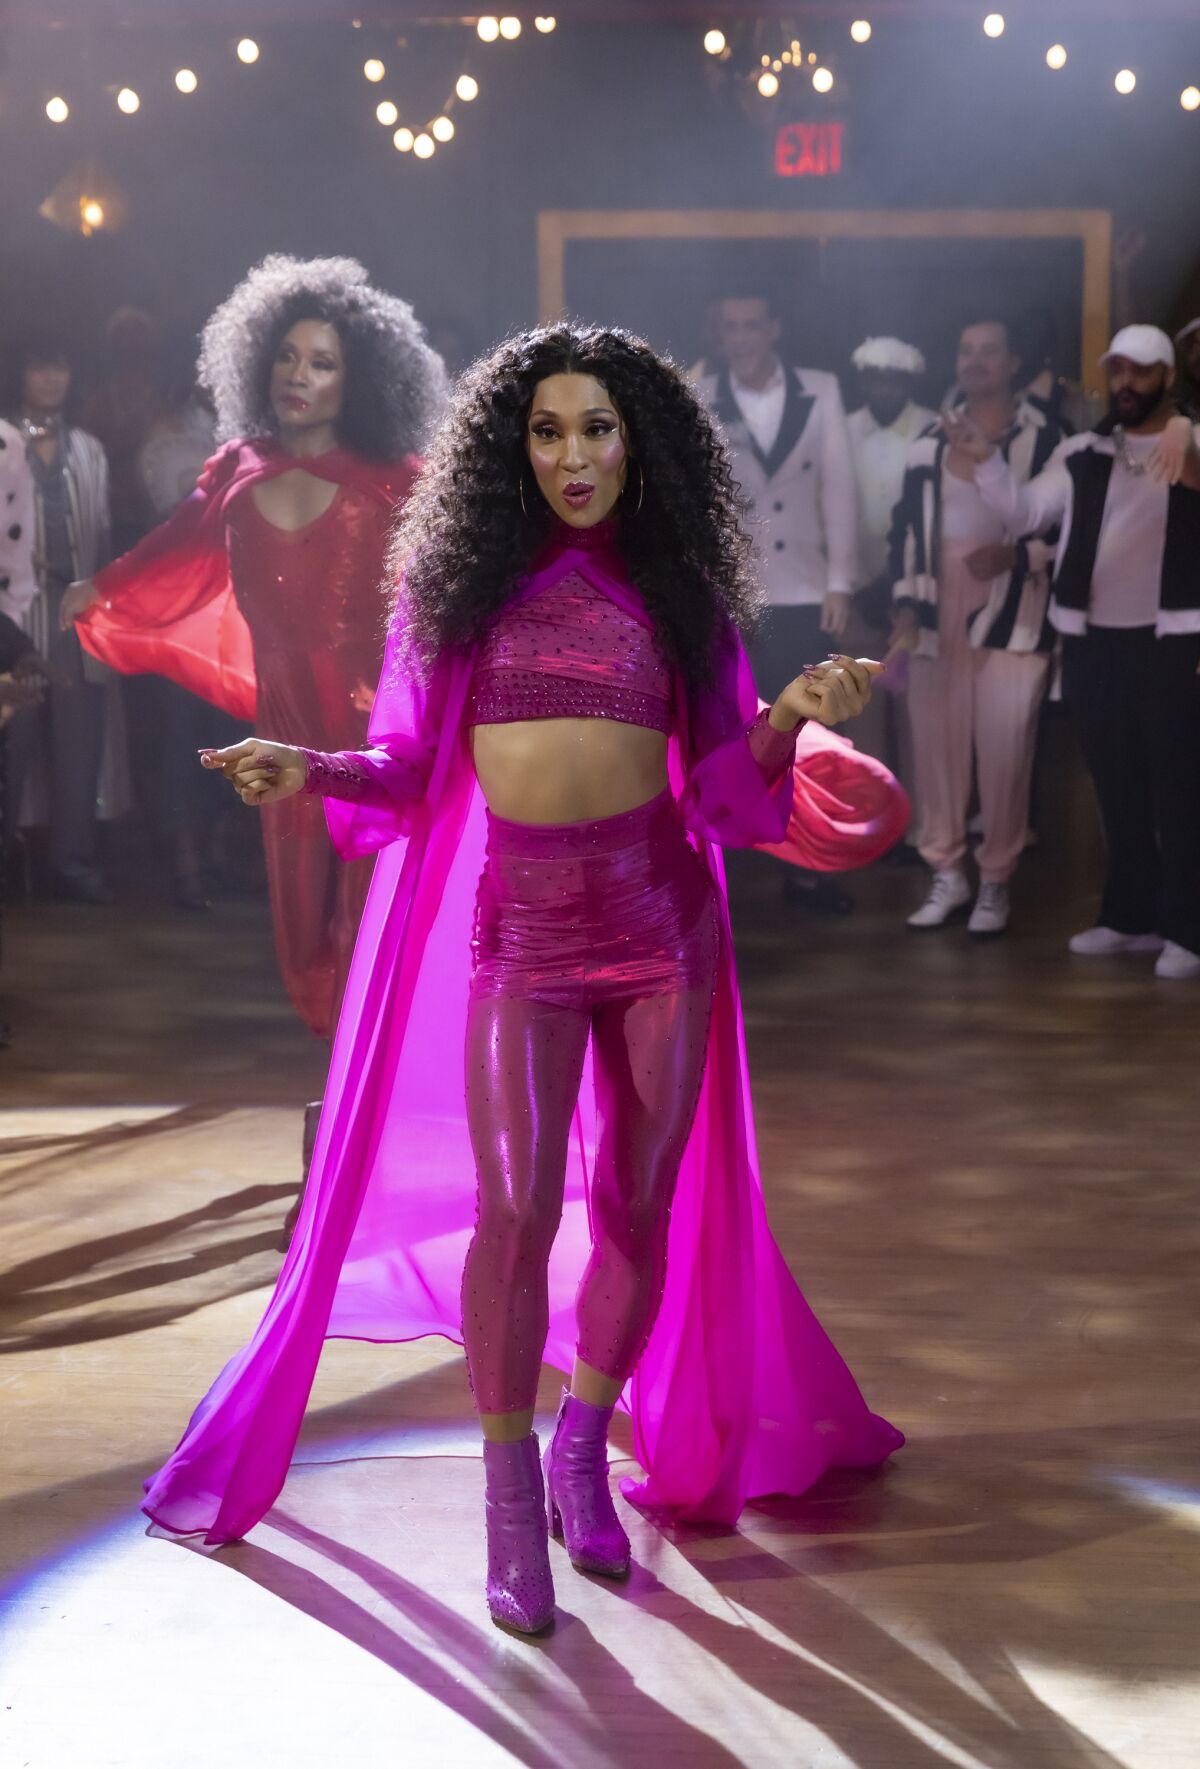 Mj Rodriguez in a bright pink outfit in a scene from "Pose."